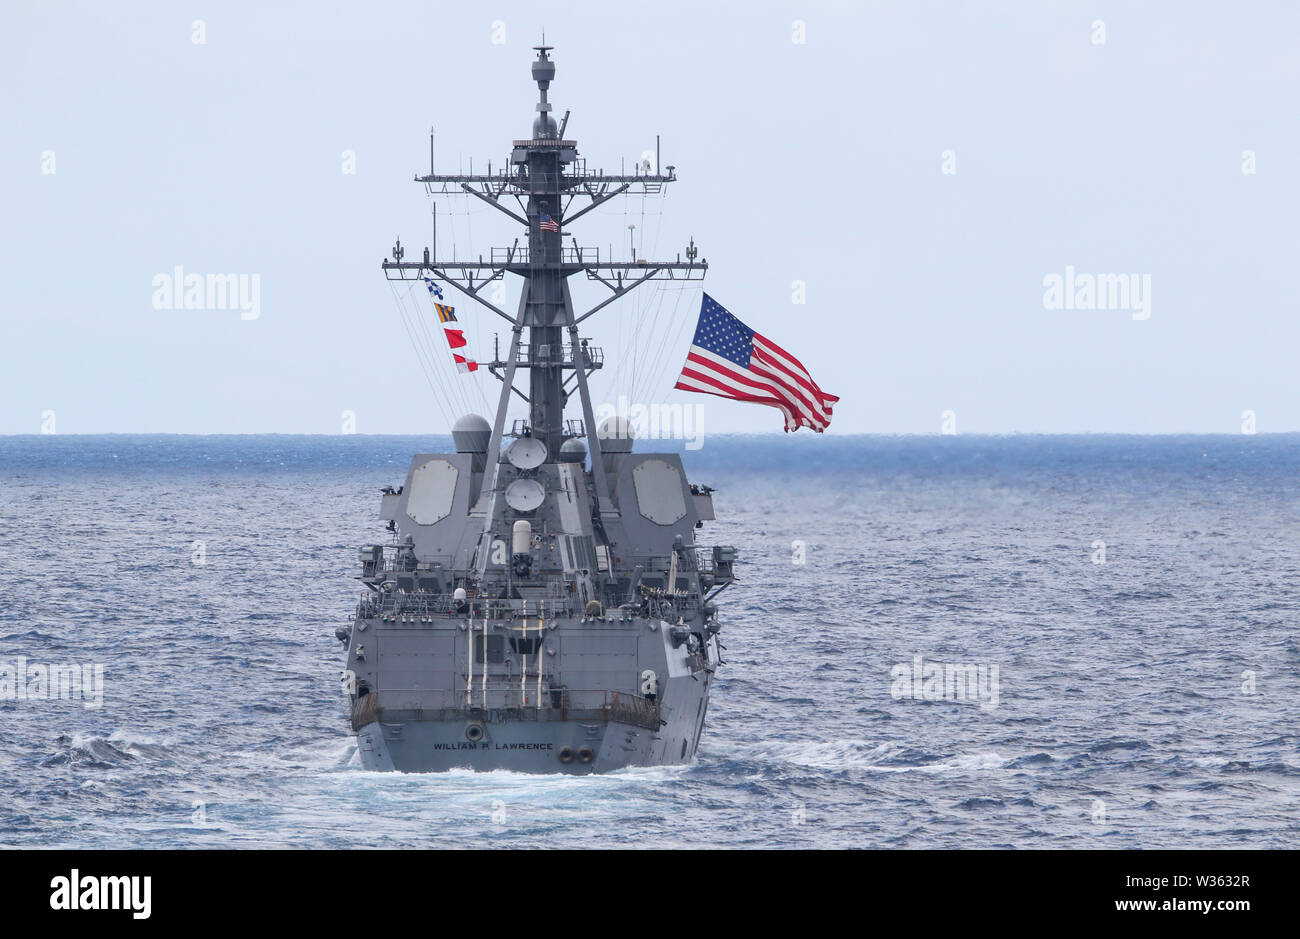 190711-N-DX072-1002 TASMAN SEA (July 11, 2019) The U.S. Navy Arleigh Burke-class guided-missile destroyer USS William P. Lawrence (DDG 110) transits with the amphibious transport dock ship USS Green Bay (LPD 20) in a photo exercise (PHOTOEX) during Talisman Sabre 2019. Green Bay, part of the Wasp Expeditionary Strike Group, with embarked 31st Marine Expeditionary Unit, is currently participating in Talisman Sabre 2019 off the coast of Northern Australia. A bilateral, biennial event, Talisman Sabre is designed to improve U.S. and Australian combat training, readiness and interoperability throug Stock Photo